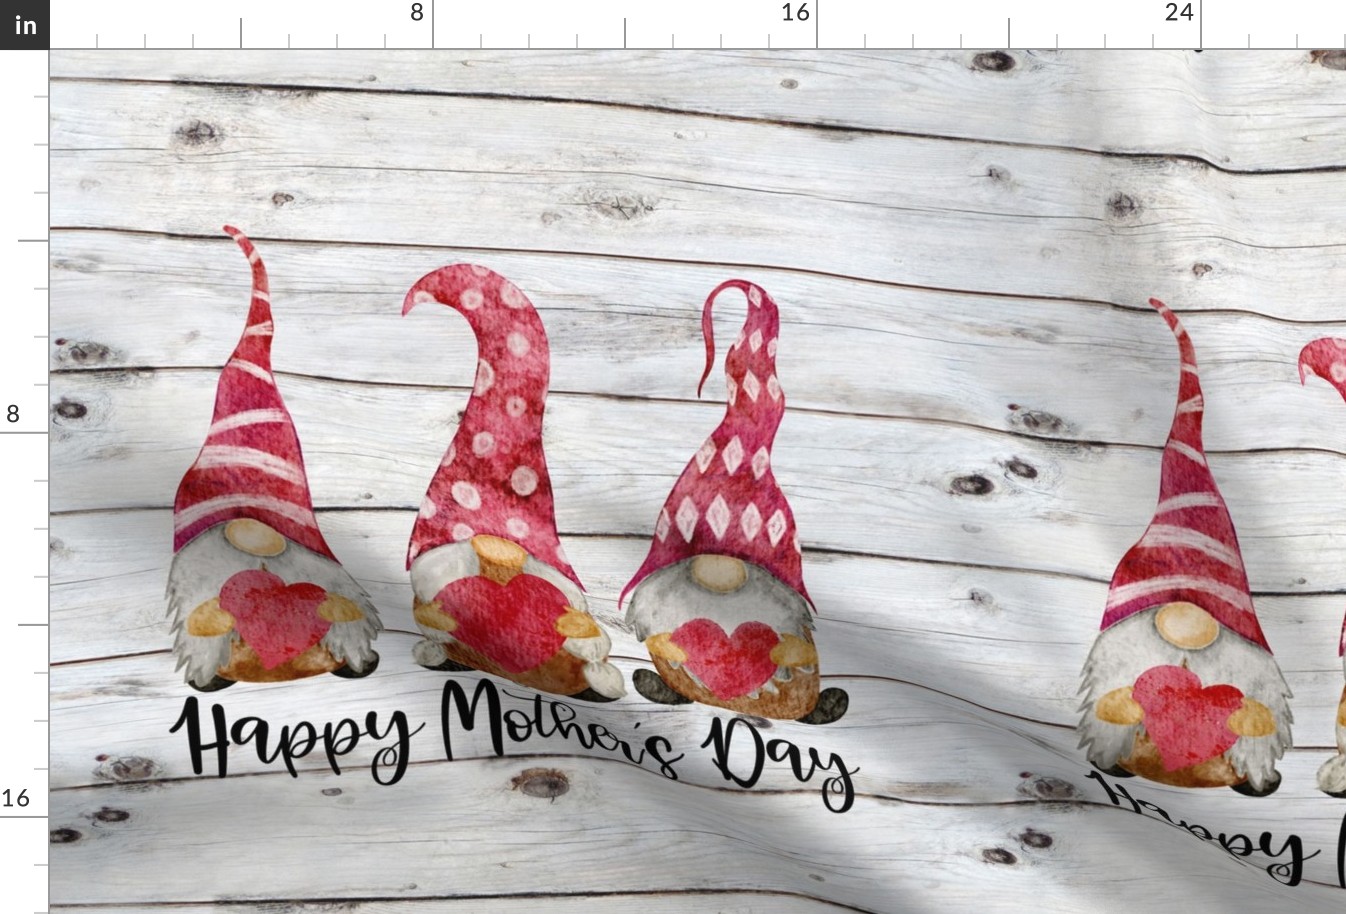 Happy Mothers Day Red Gnomes 18 inch square